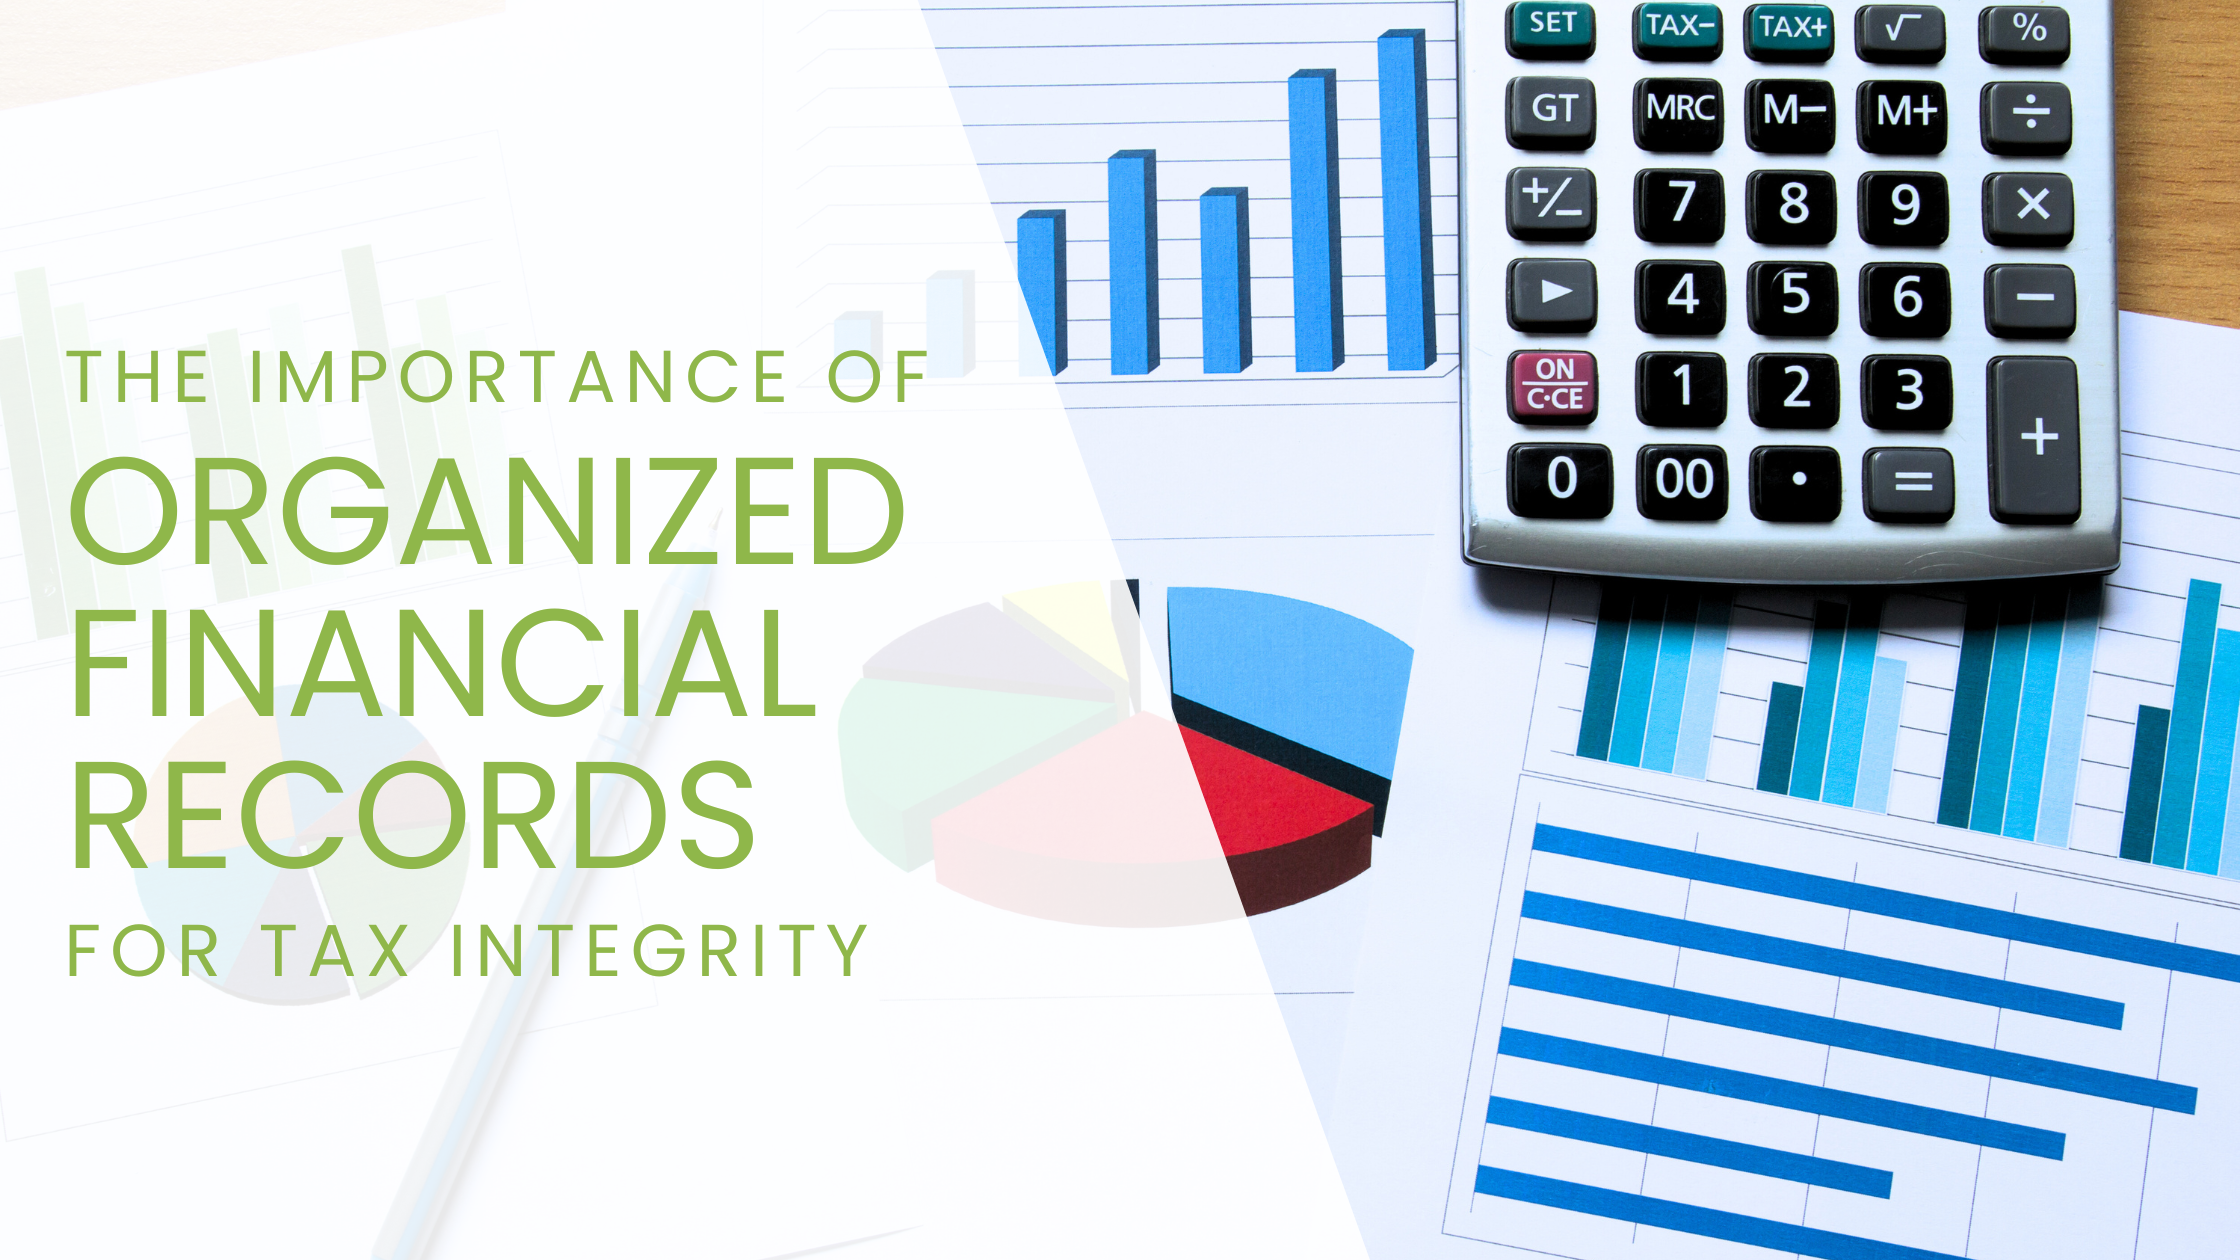 The Importance of Organized Financial Records for Tax Integrity